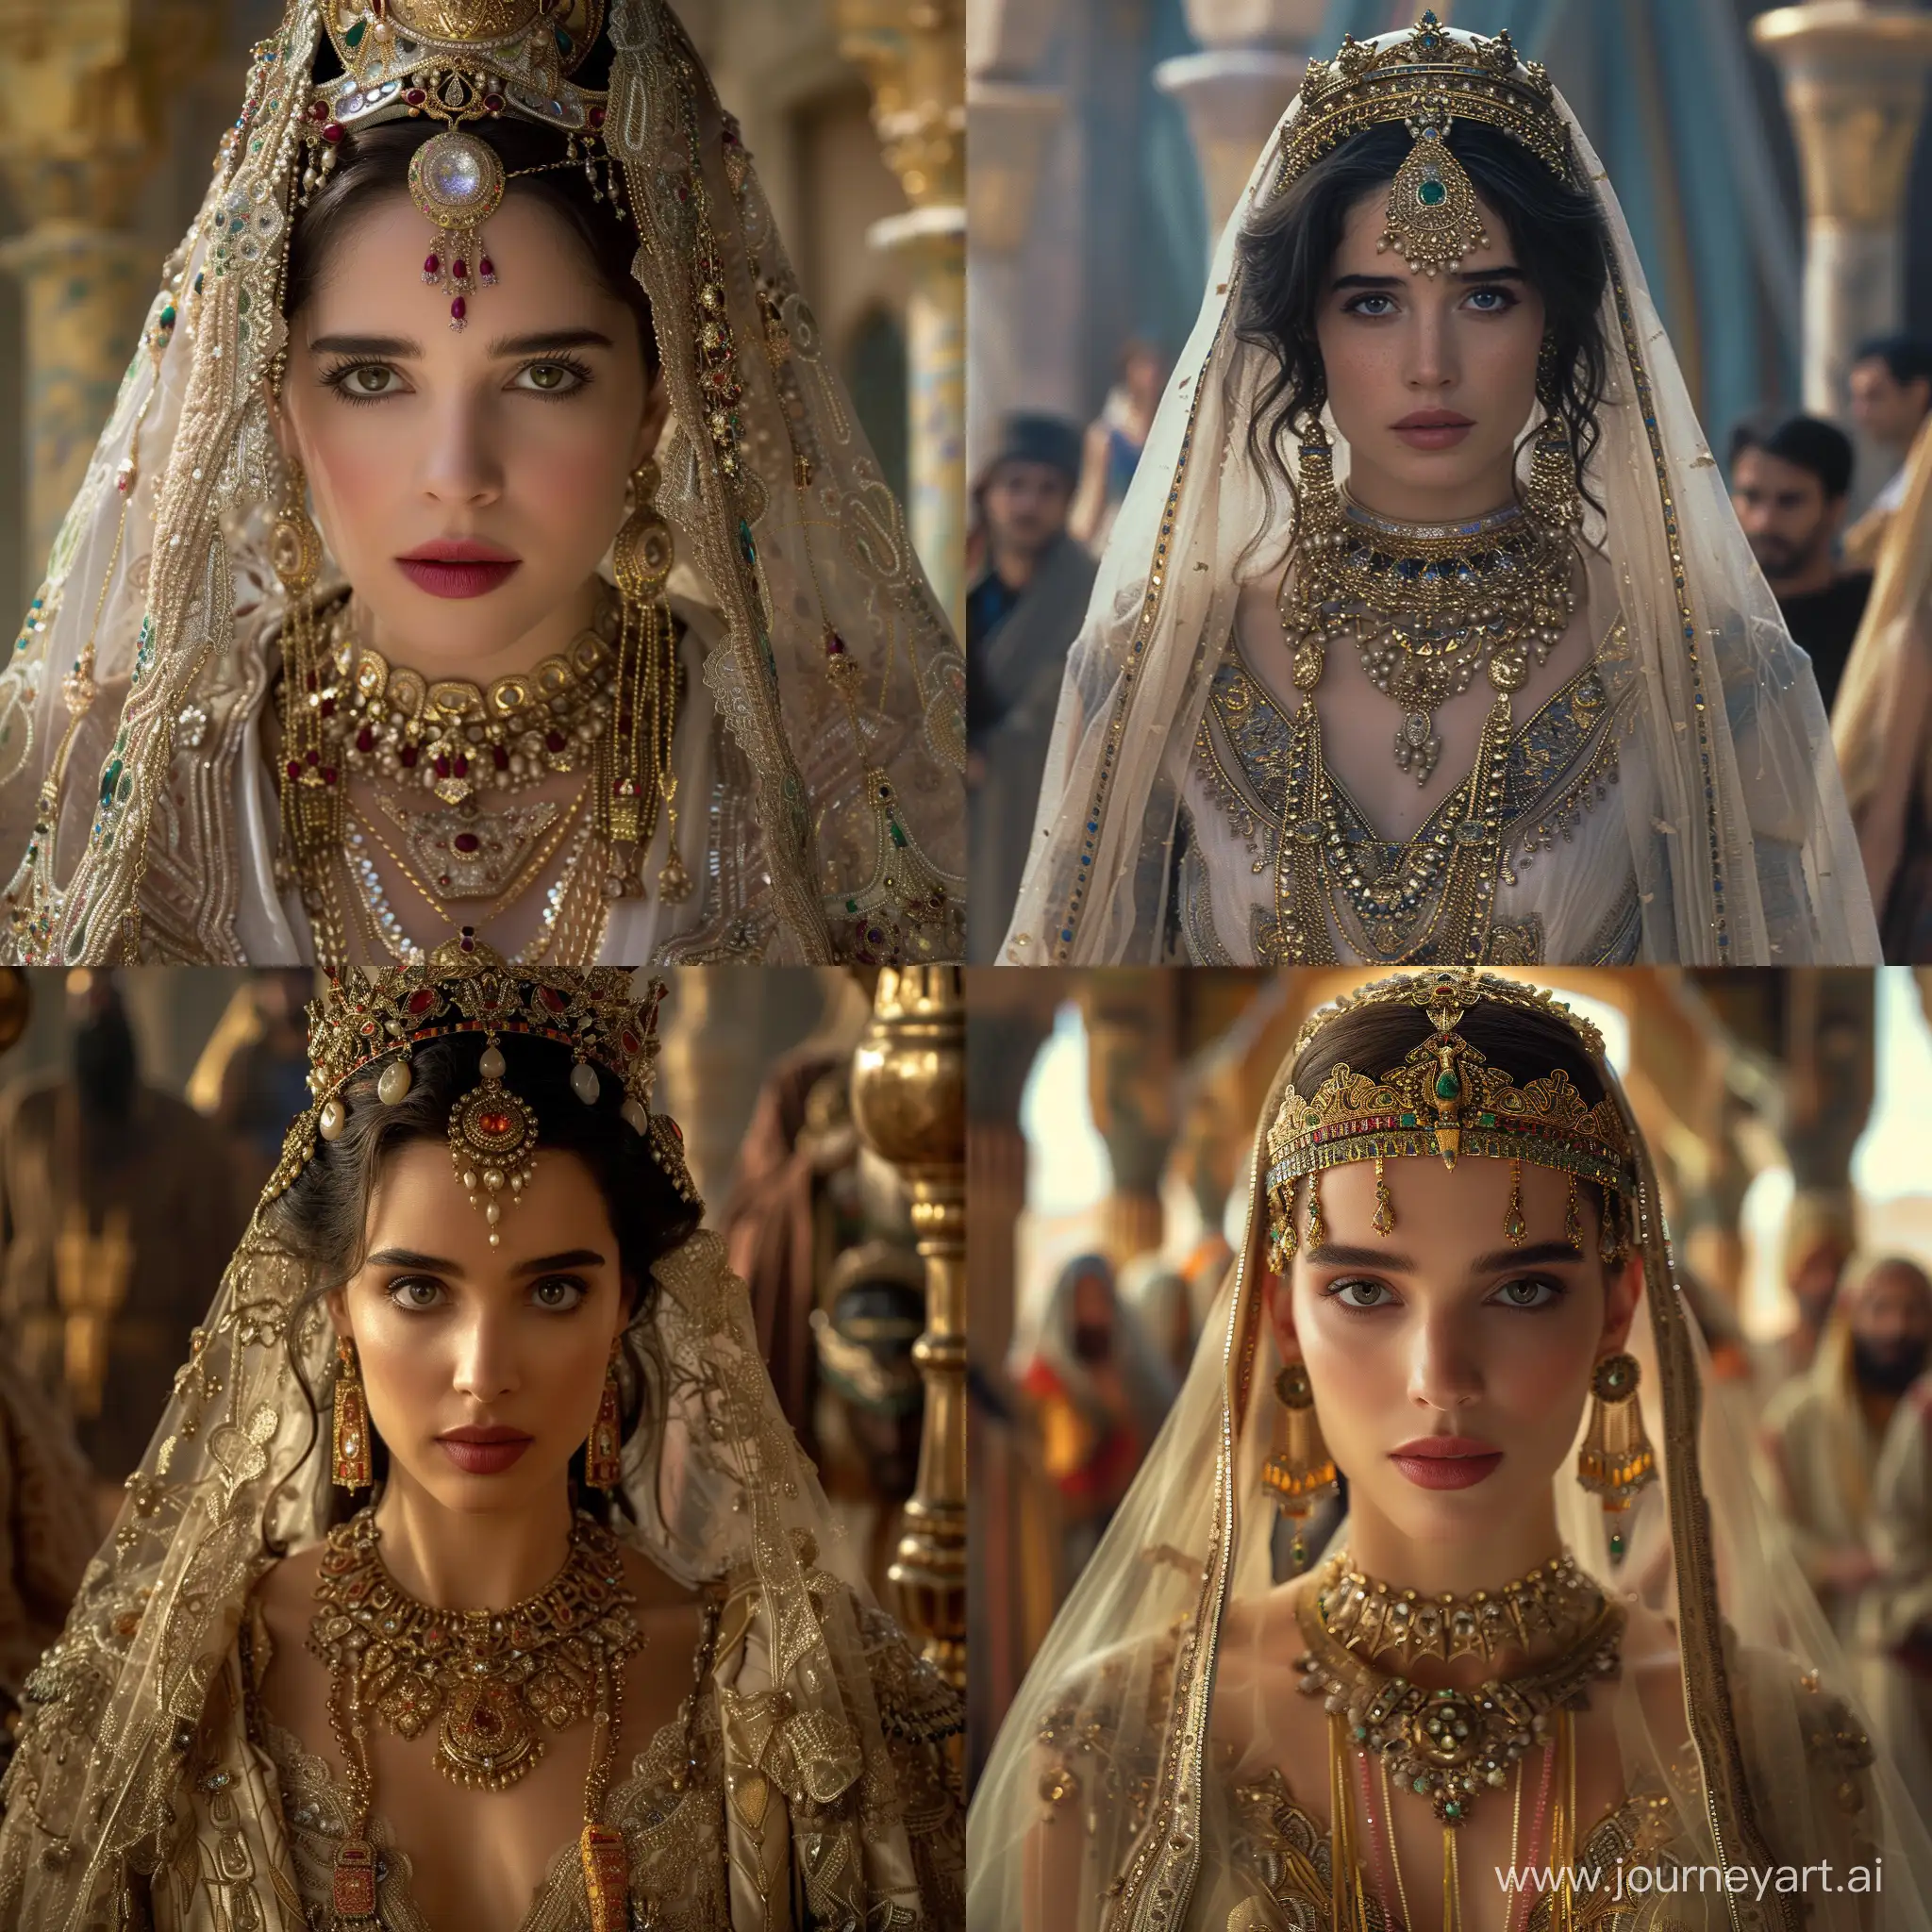 A cinematic photo from the Oscar winning film "the ancient queen of Persia", the extremely intricate details of Queen Esther's royal attire as she arrives for a feast. Strikingly natural and devoid of makeup, her beauty is otherworldly. Adorned in ethereal jewelry and shimmering gold, she appears as if she's stepped out of a magical realm. The image, captured in stunning Ultra HD, is a visual treat that could easily serve as the epitome of regal elegance — s 250